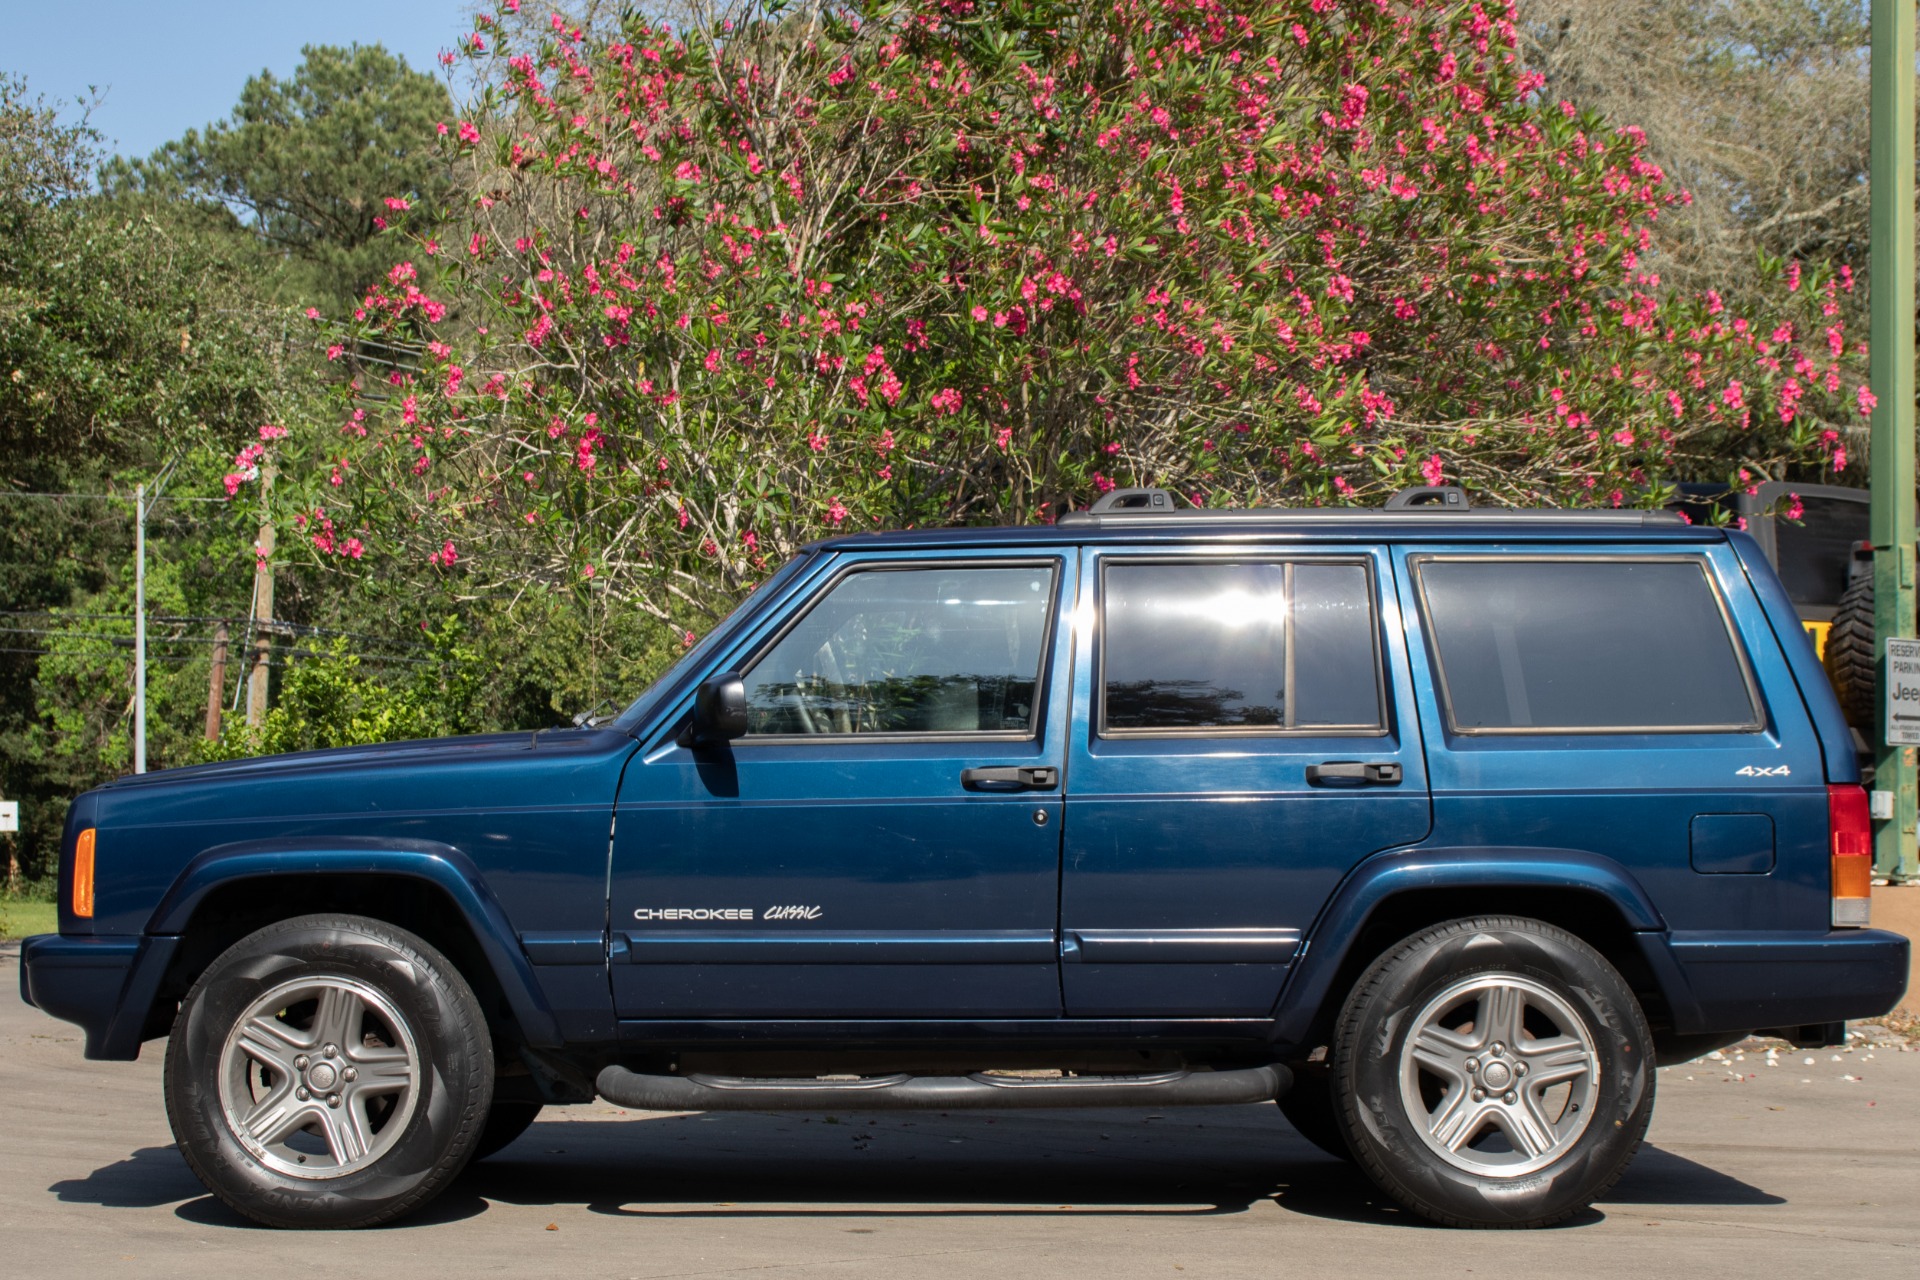 Used 2000 Jeep Cherokee Classic For Sale 7 995 Select Jeeps Inc 